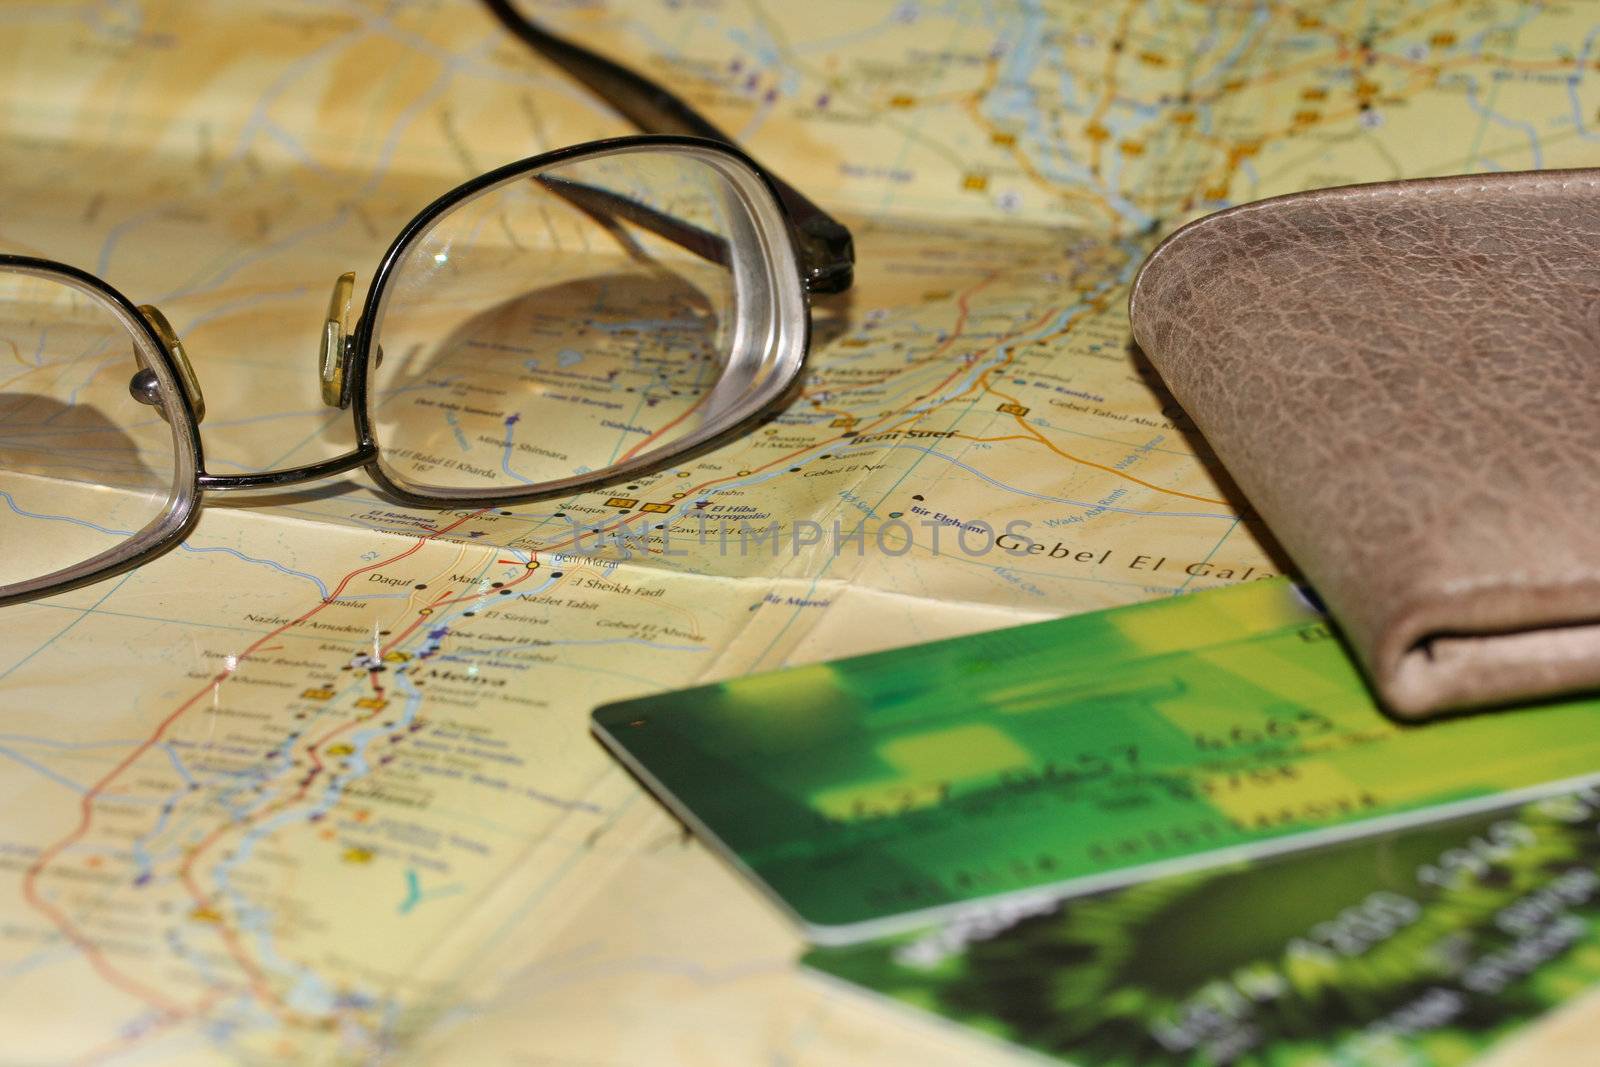 Purse, credit cards and glasses on a tourist map